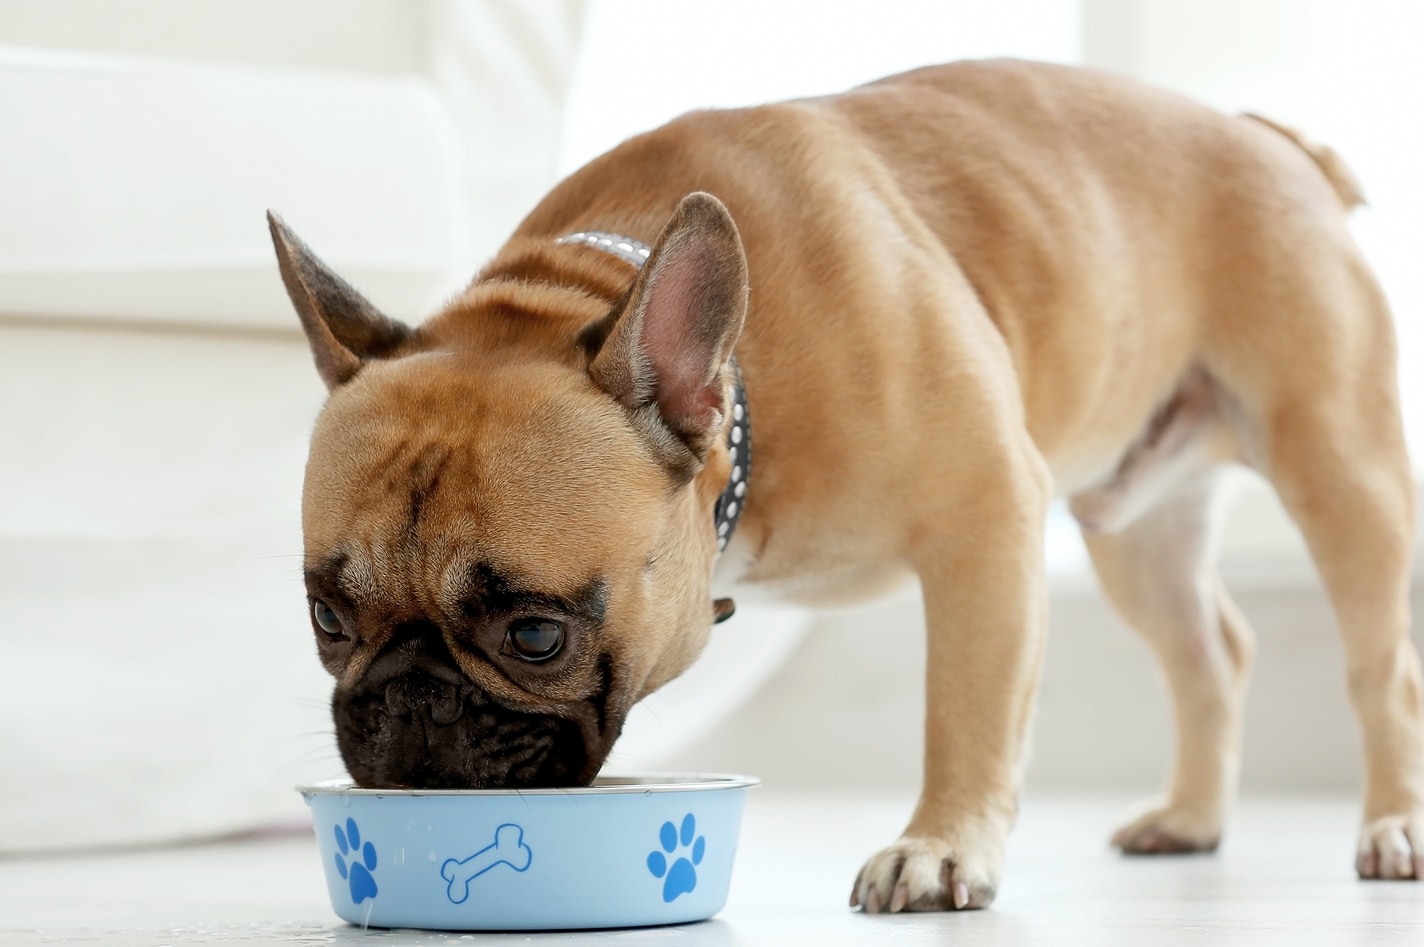 French bulldog eating food out of blue dog food bowl.